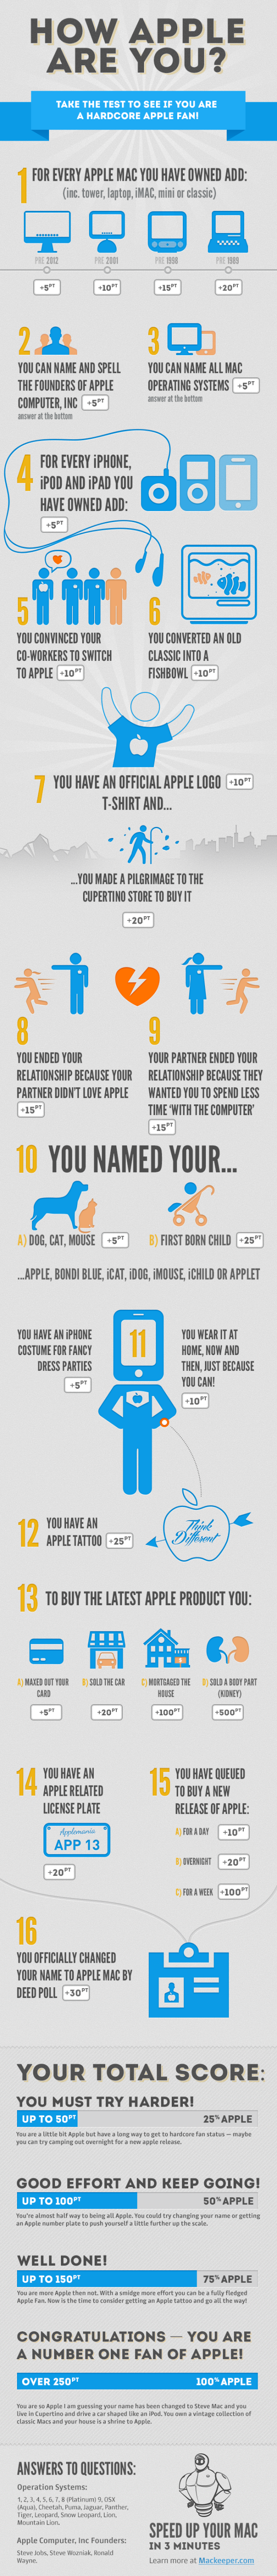 How Apple Are You? infographic